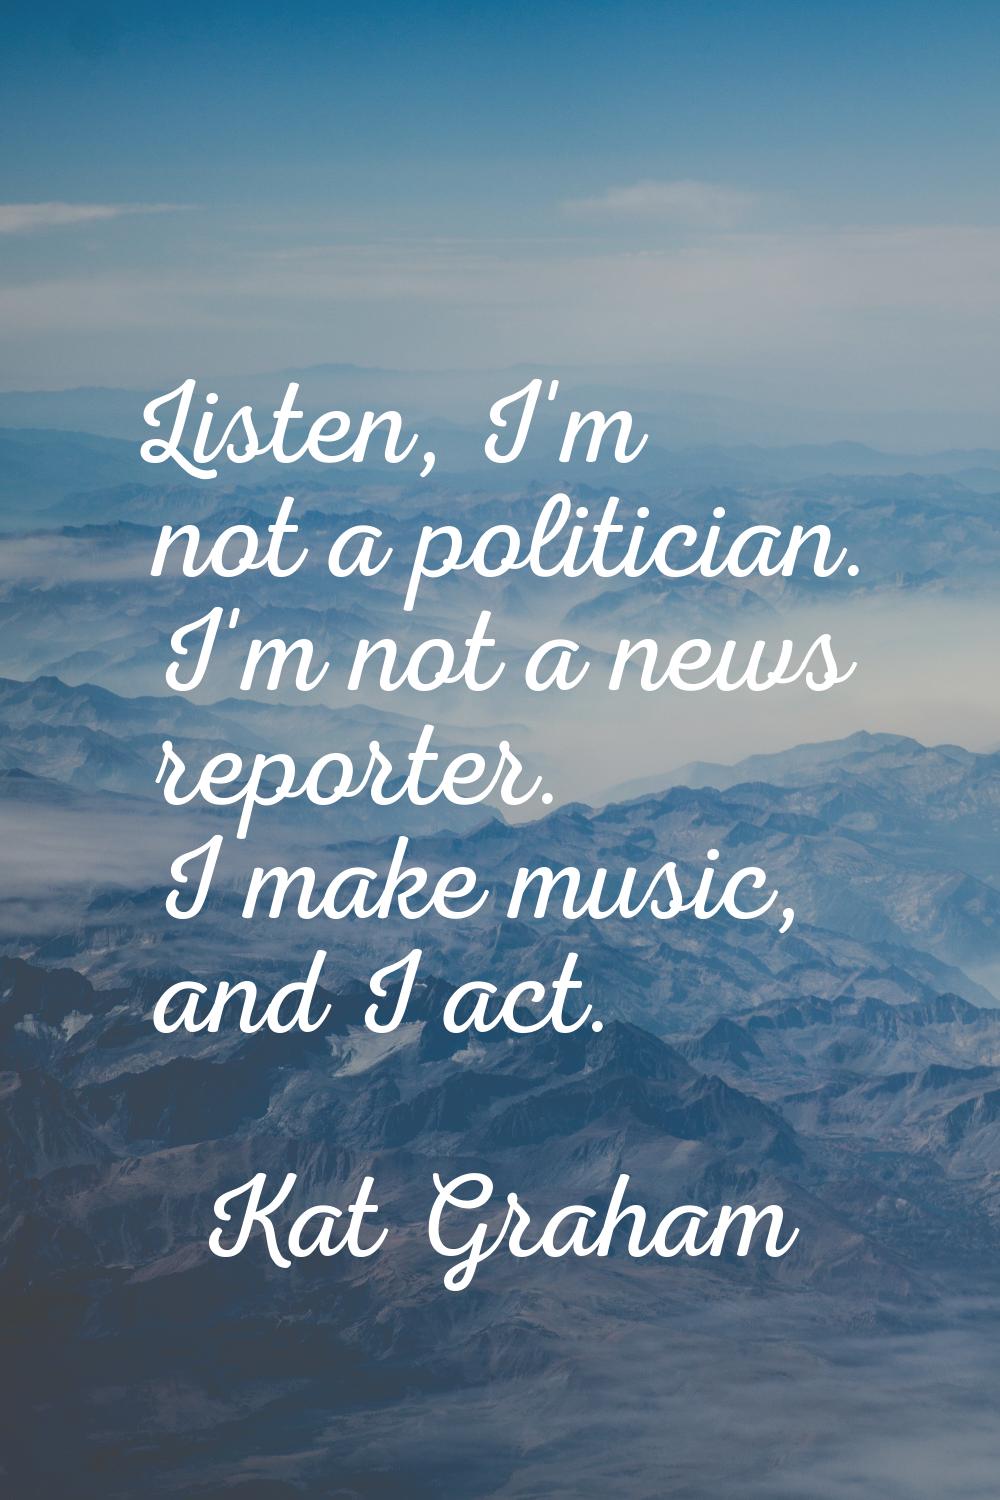 Listen, I'm not a politician. I'm not a news reporter. I make music, and I act.